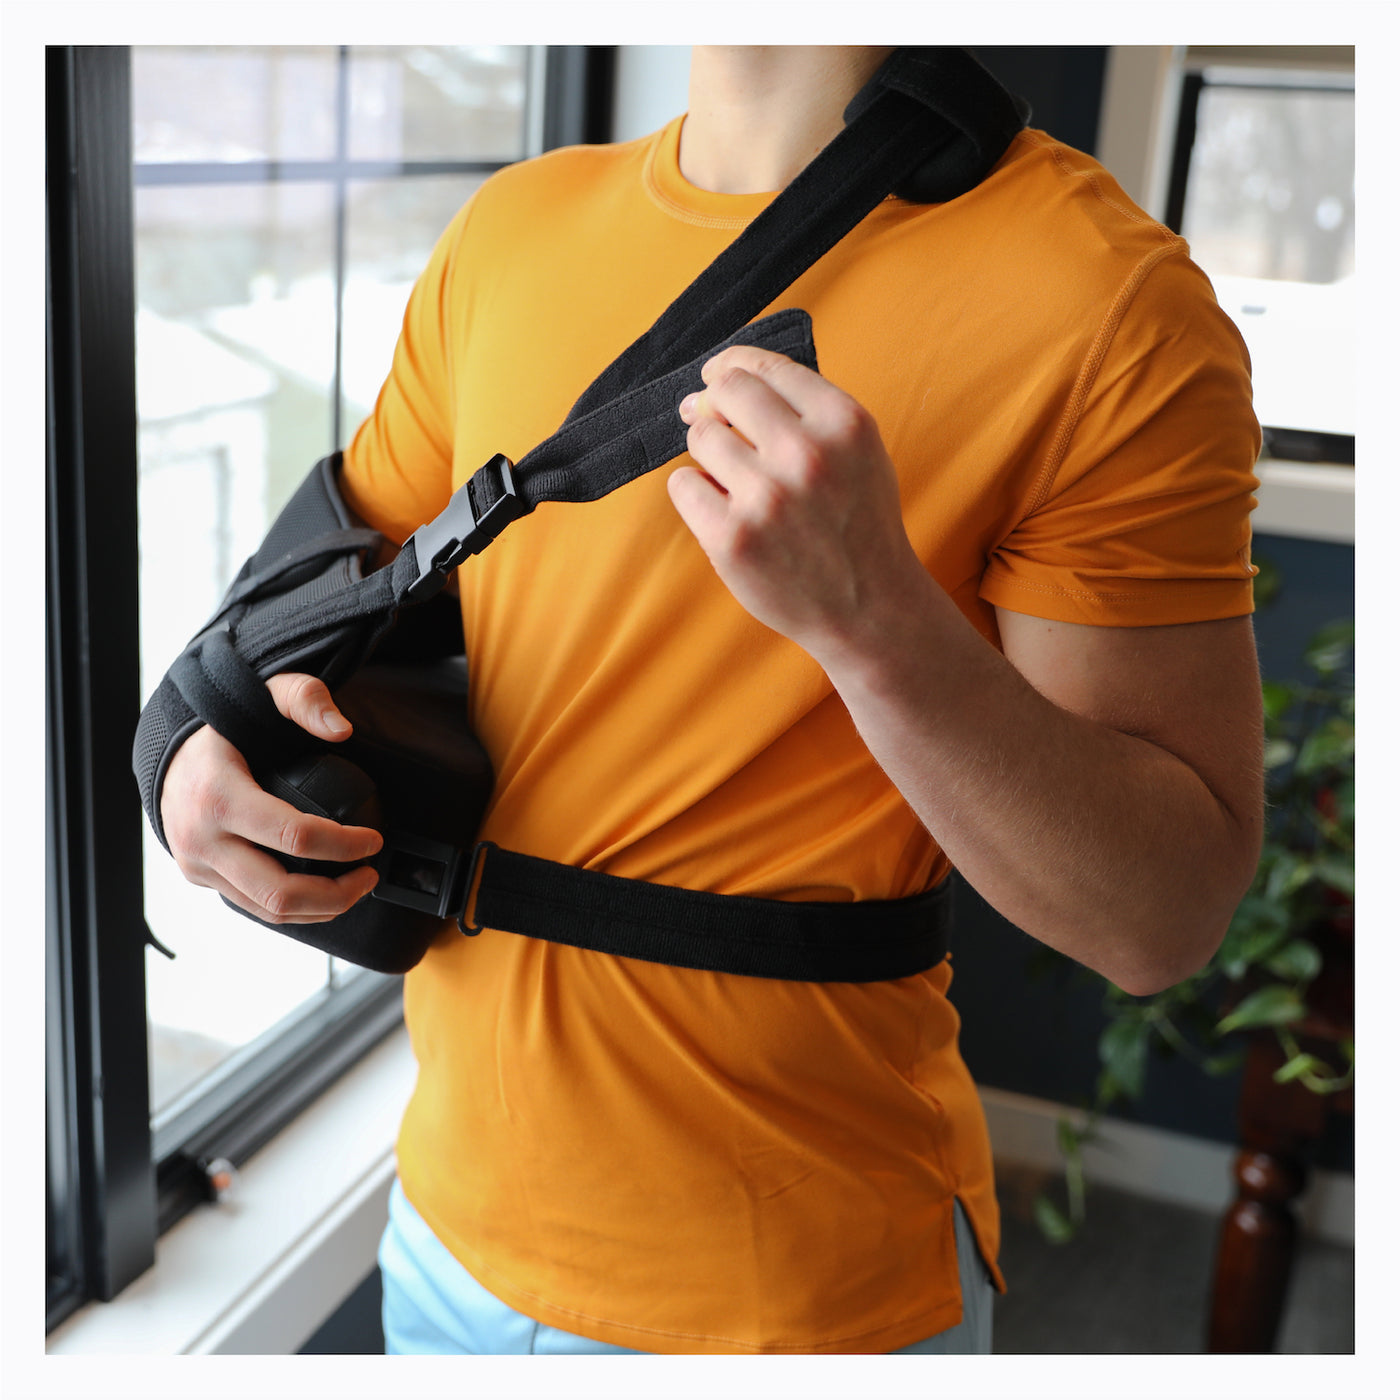 the adjustable rotator cuff sling has fastener straps for a totally custom fit